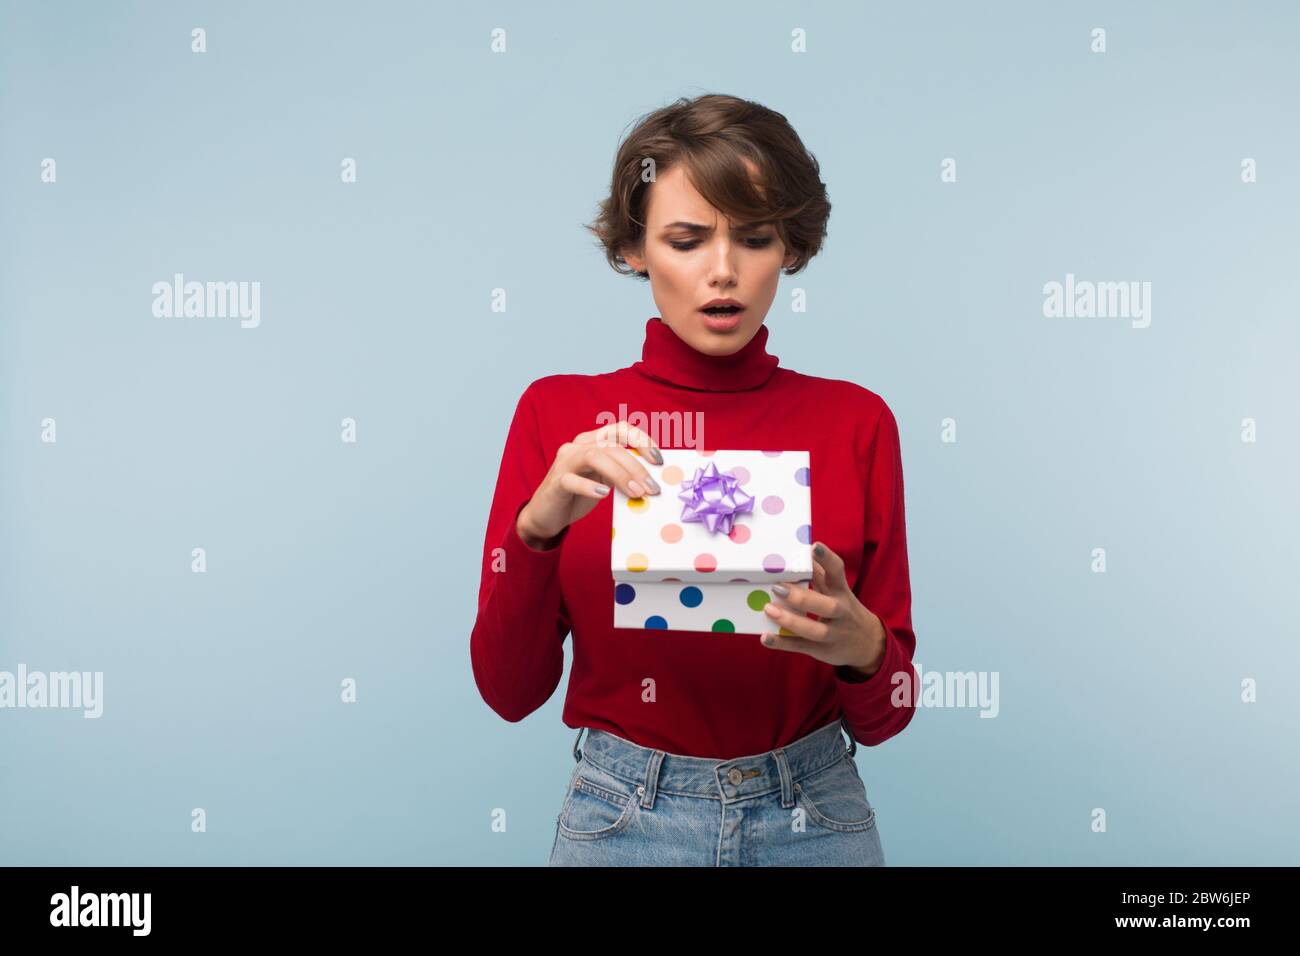 Young serious woman with dark short hair in red sweater sadly opening little present box over blue background isolated Stock Photo